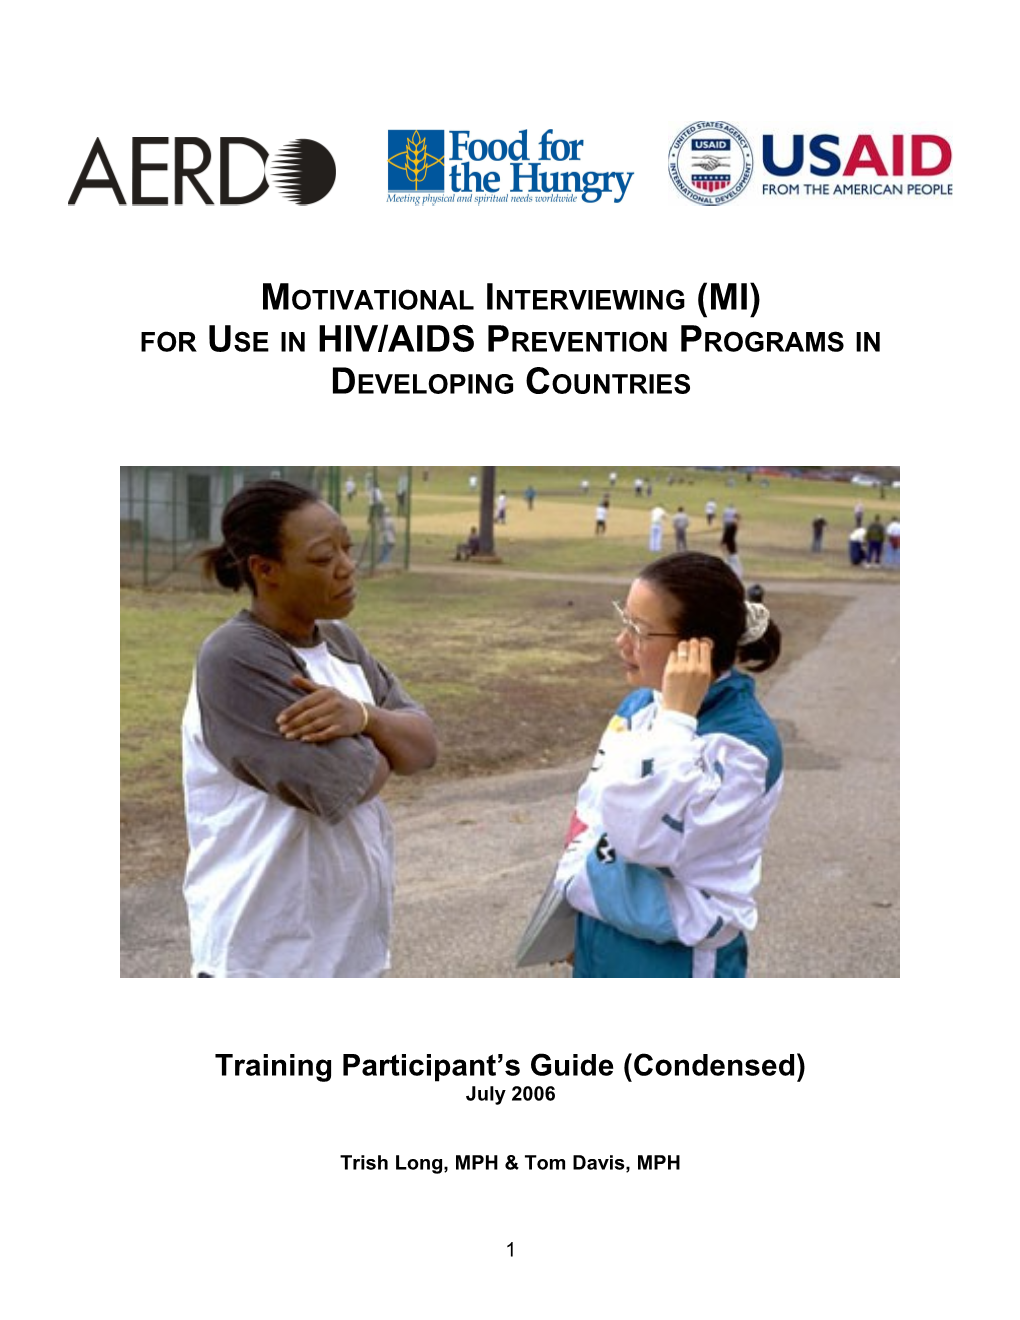 For Use in HIV/AIDS Prevention Programs in Developing Countries